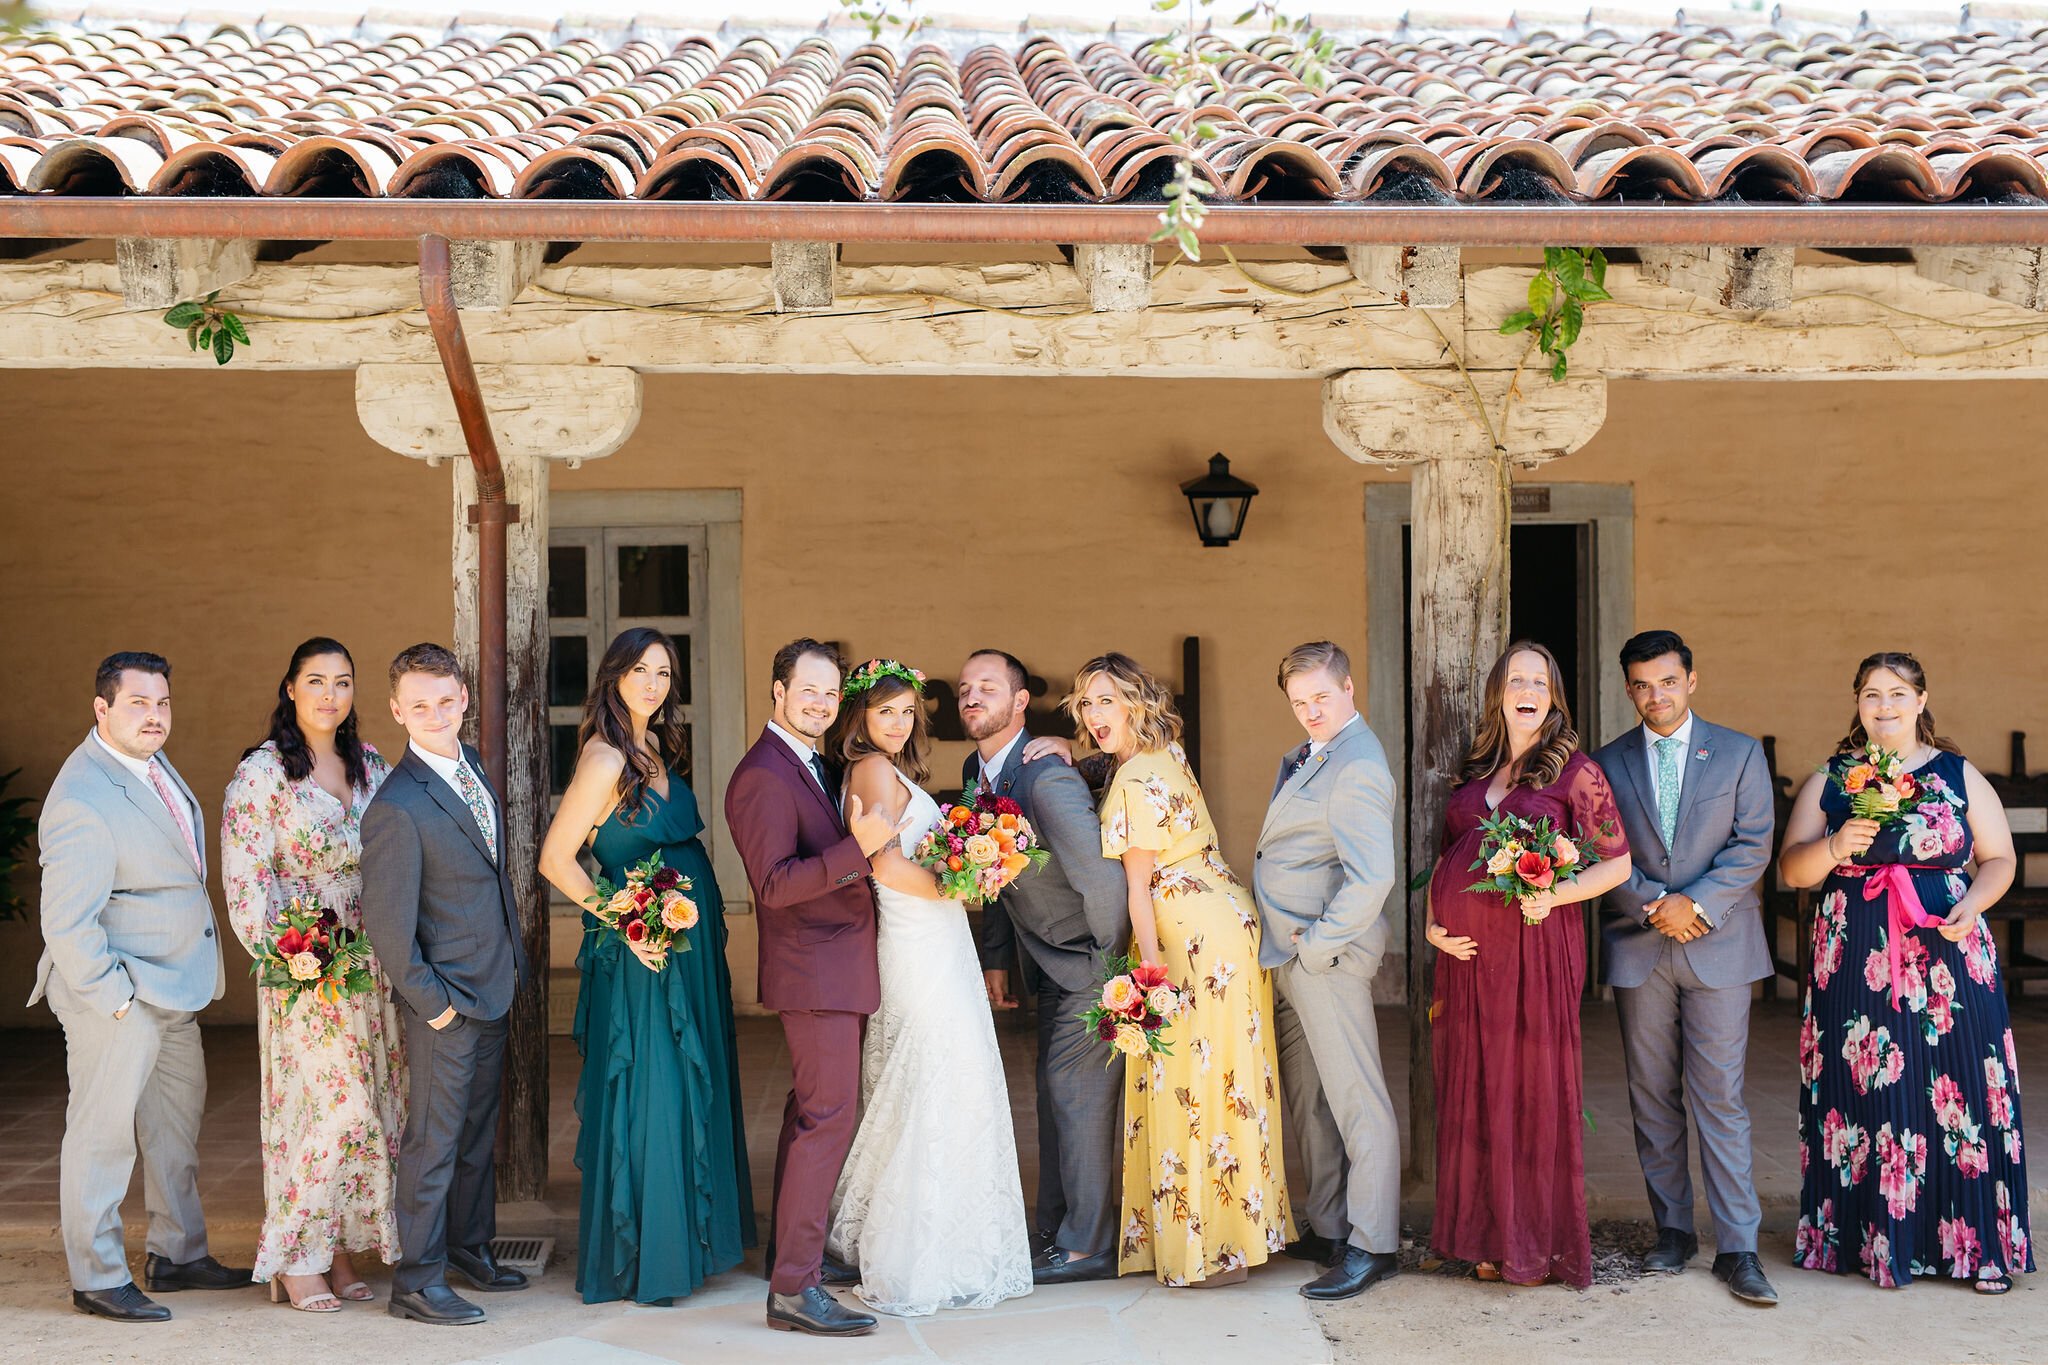 www.santabarbarawedding.com | Santa Barbara Historical Museum | Lerina Winter Photography | Couple and Wedding Party Under the Tiled Overhang Roof 